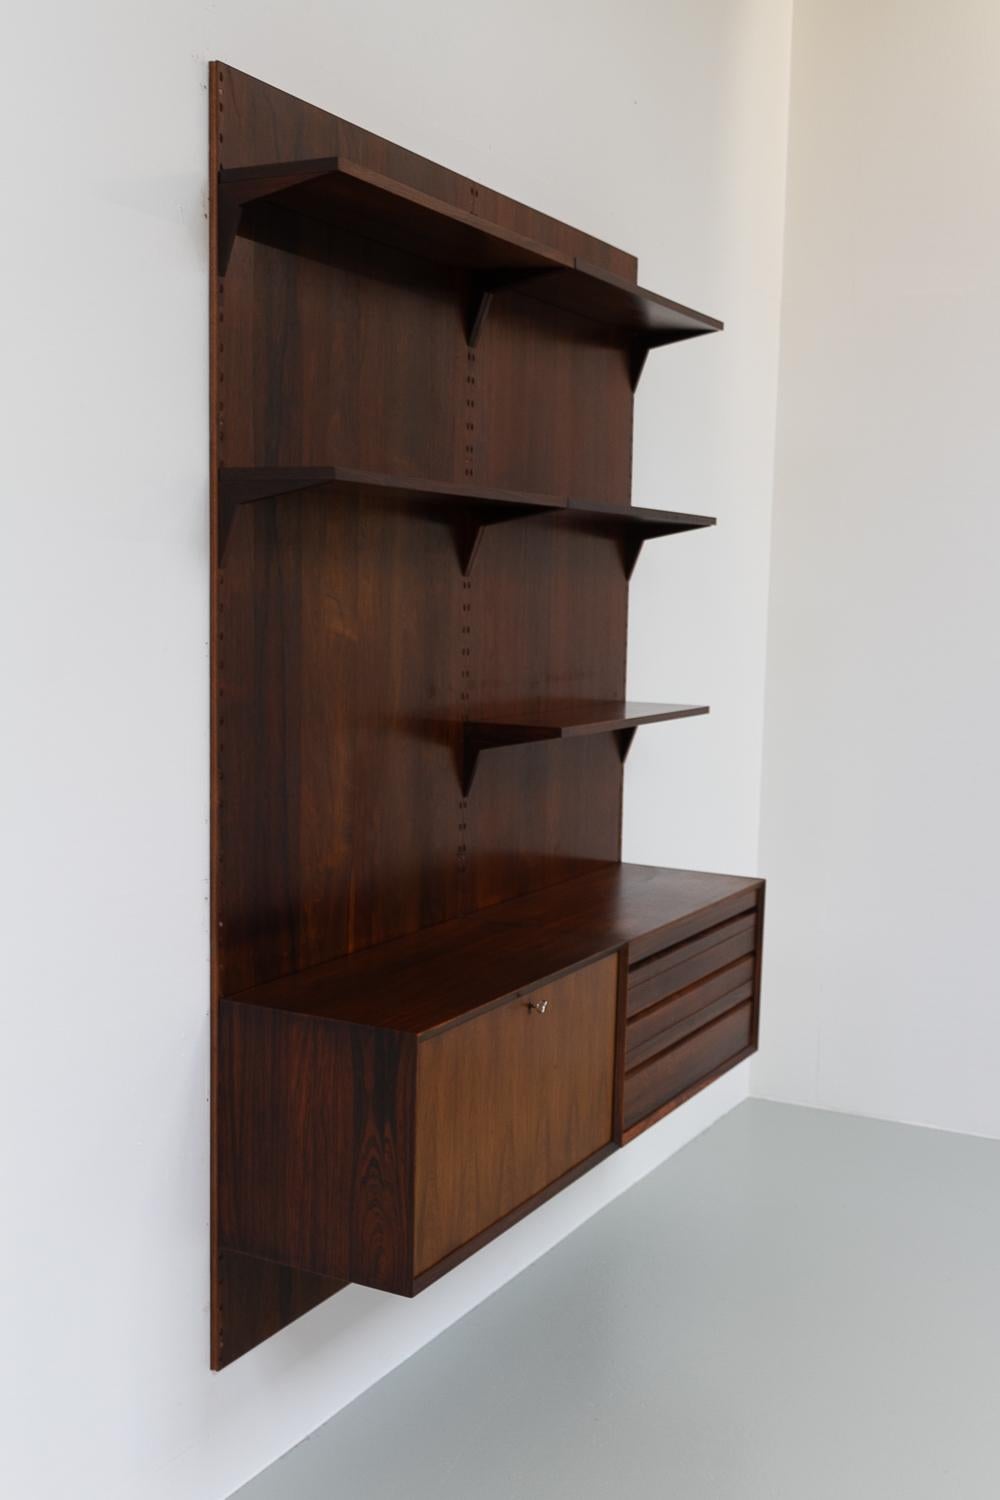 Vintage Danish 2-Bay Rosewood Modular Wall Unit by Poul Cadovius for Cado 1960s.

Mid-Century Modern 2 bay shelving system model Cado with back panels. This is a original vintage floating bookcase designed by Danish architect Poul Cadovius.